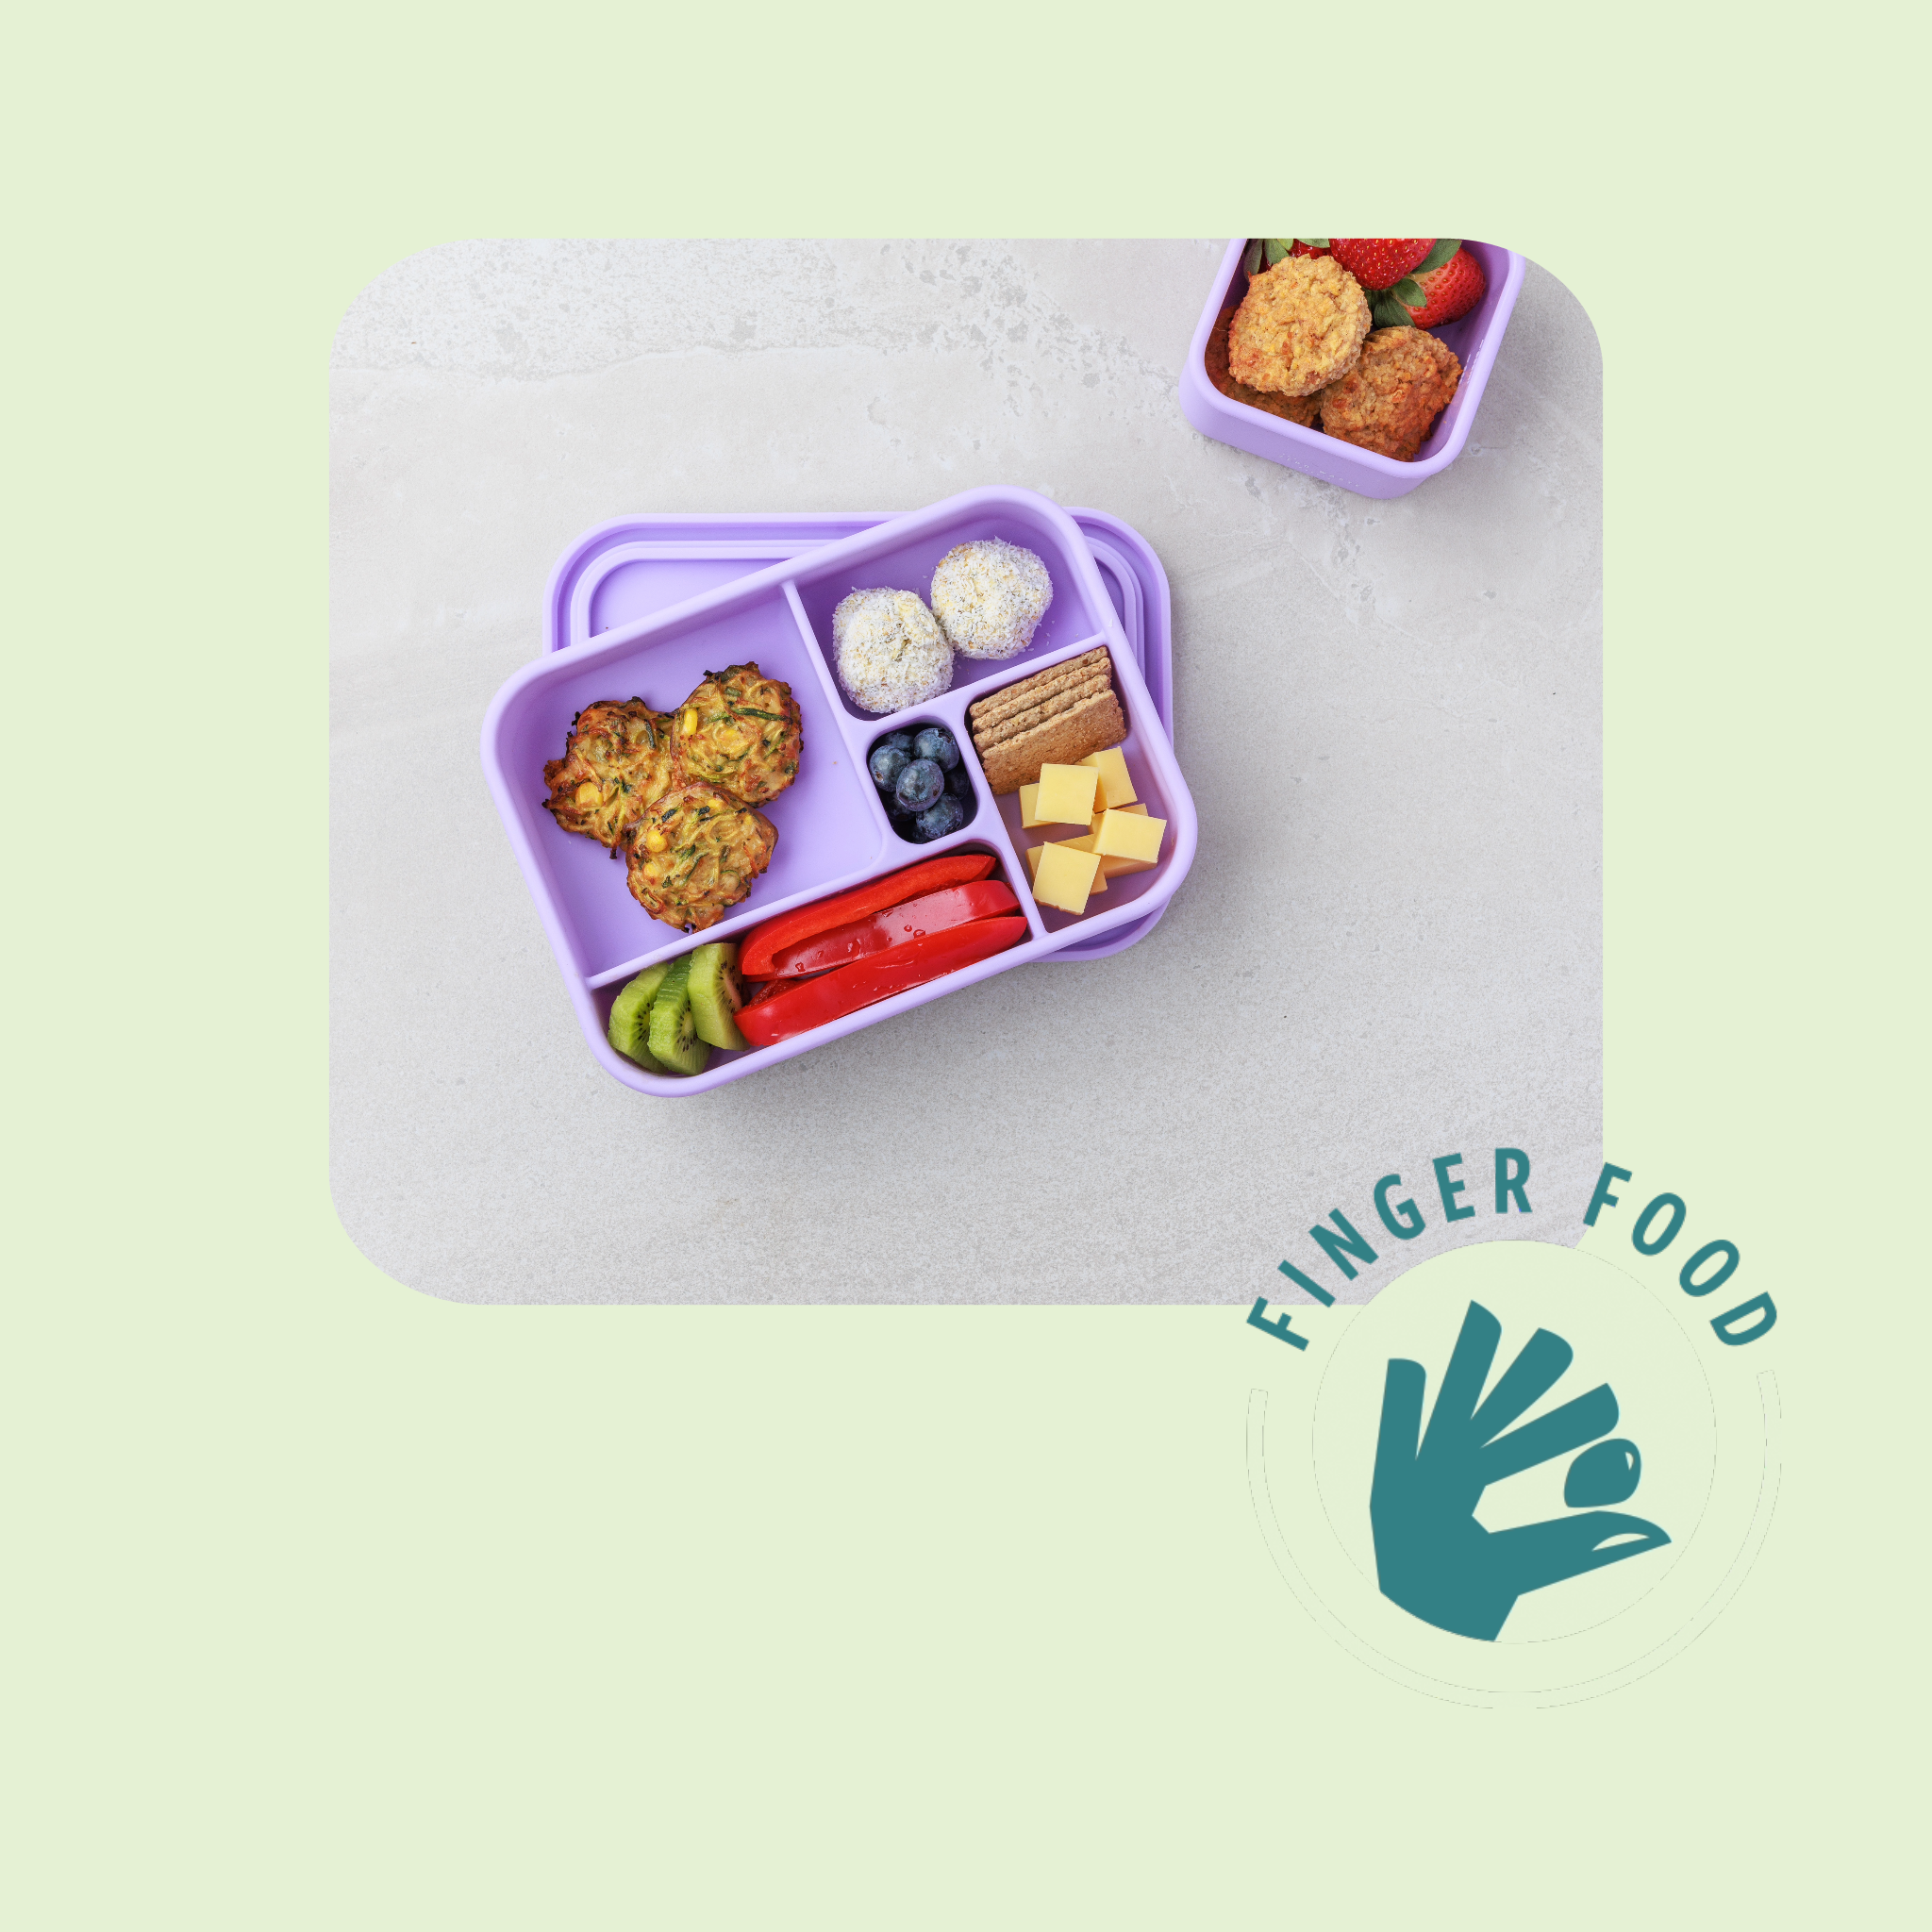 Lunchbox with Nutritious snacks for Toddlers and Children, as part of Audrey and Alfie's Finger Food Range. Including Raspberry Bircher Bites, Zucchini & Corn Fritters and Apple and Carrot Muffins. 